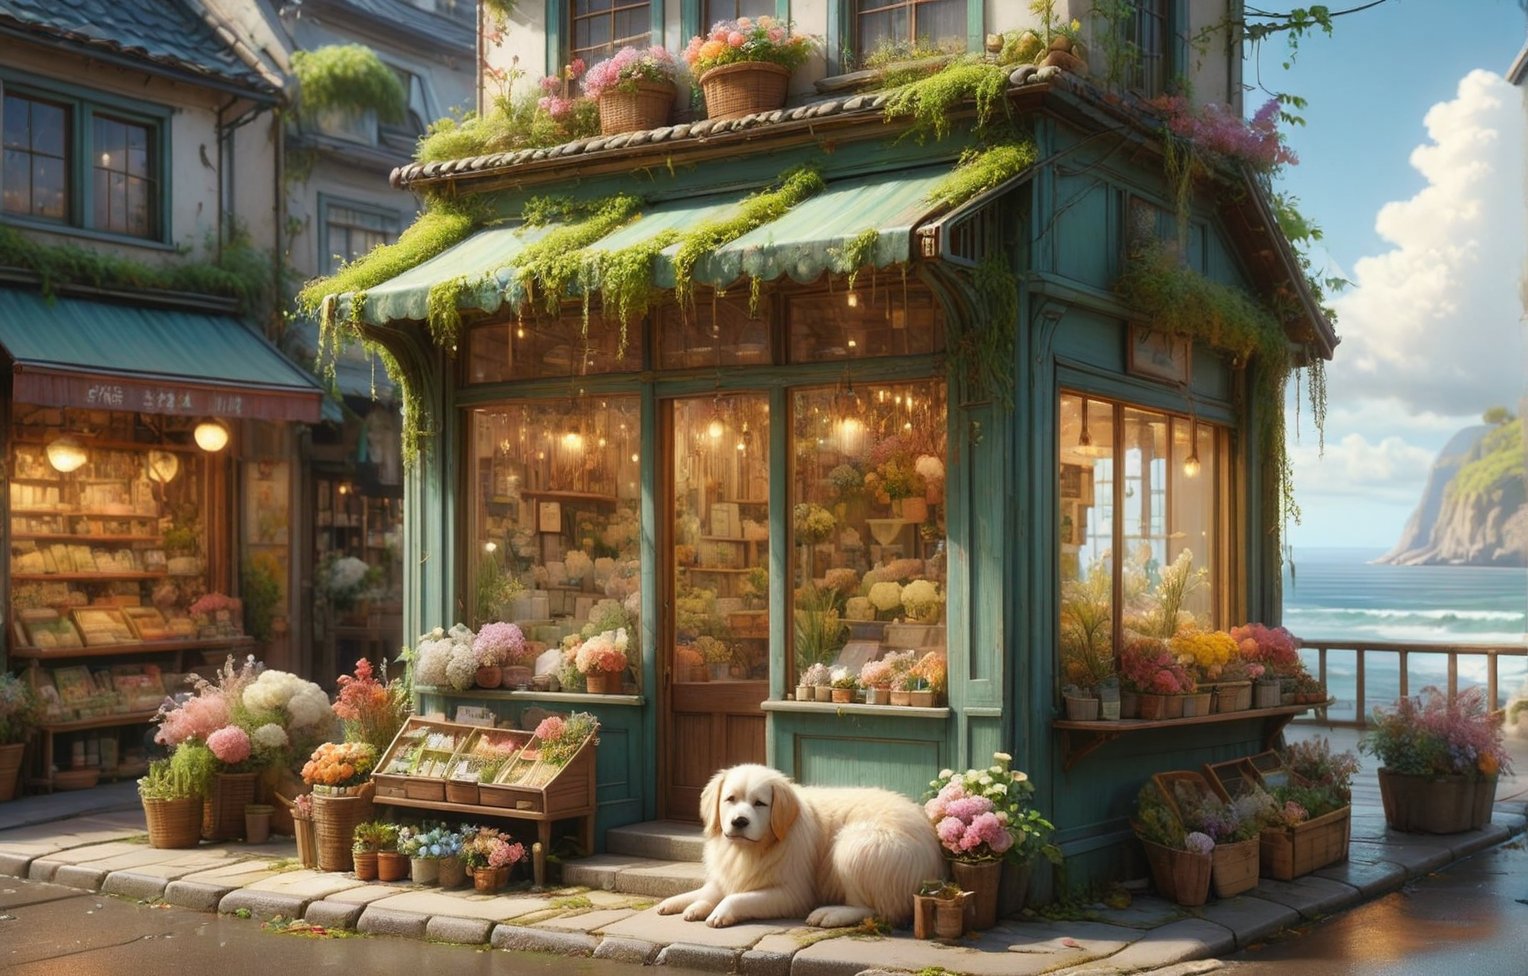 create something no one would expect.
(A flower shop)(cute sleeping dog)(sea view) A flower shop with a view of the sea, devoid of people, featuring a sleeping dog adding to the warm and cute atmosphere. The weather is sunny with seagulls flying in the distance. The flower shop is a wooden house with an awning and flower display racks, depicted in a vintage, nostalgic, Japanese cartoon style. The scene feels like an inviting flower shop flyer, evoking a sense of charm and tranquility. CuteStyle. by Conrad Roset, Pino Daeni, Jeremy Mann, Alex Maleev, 16k resolution, alexander mcqueen, John William Waterhouse Rudolf hausner, daniel f. Gerhartz, watercolor,shuicaixiaodian